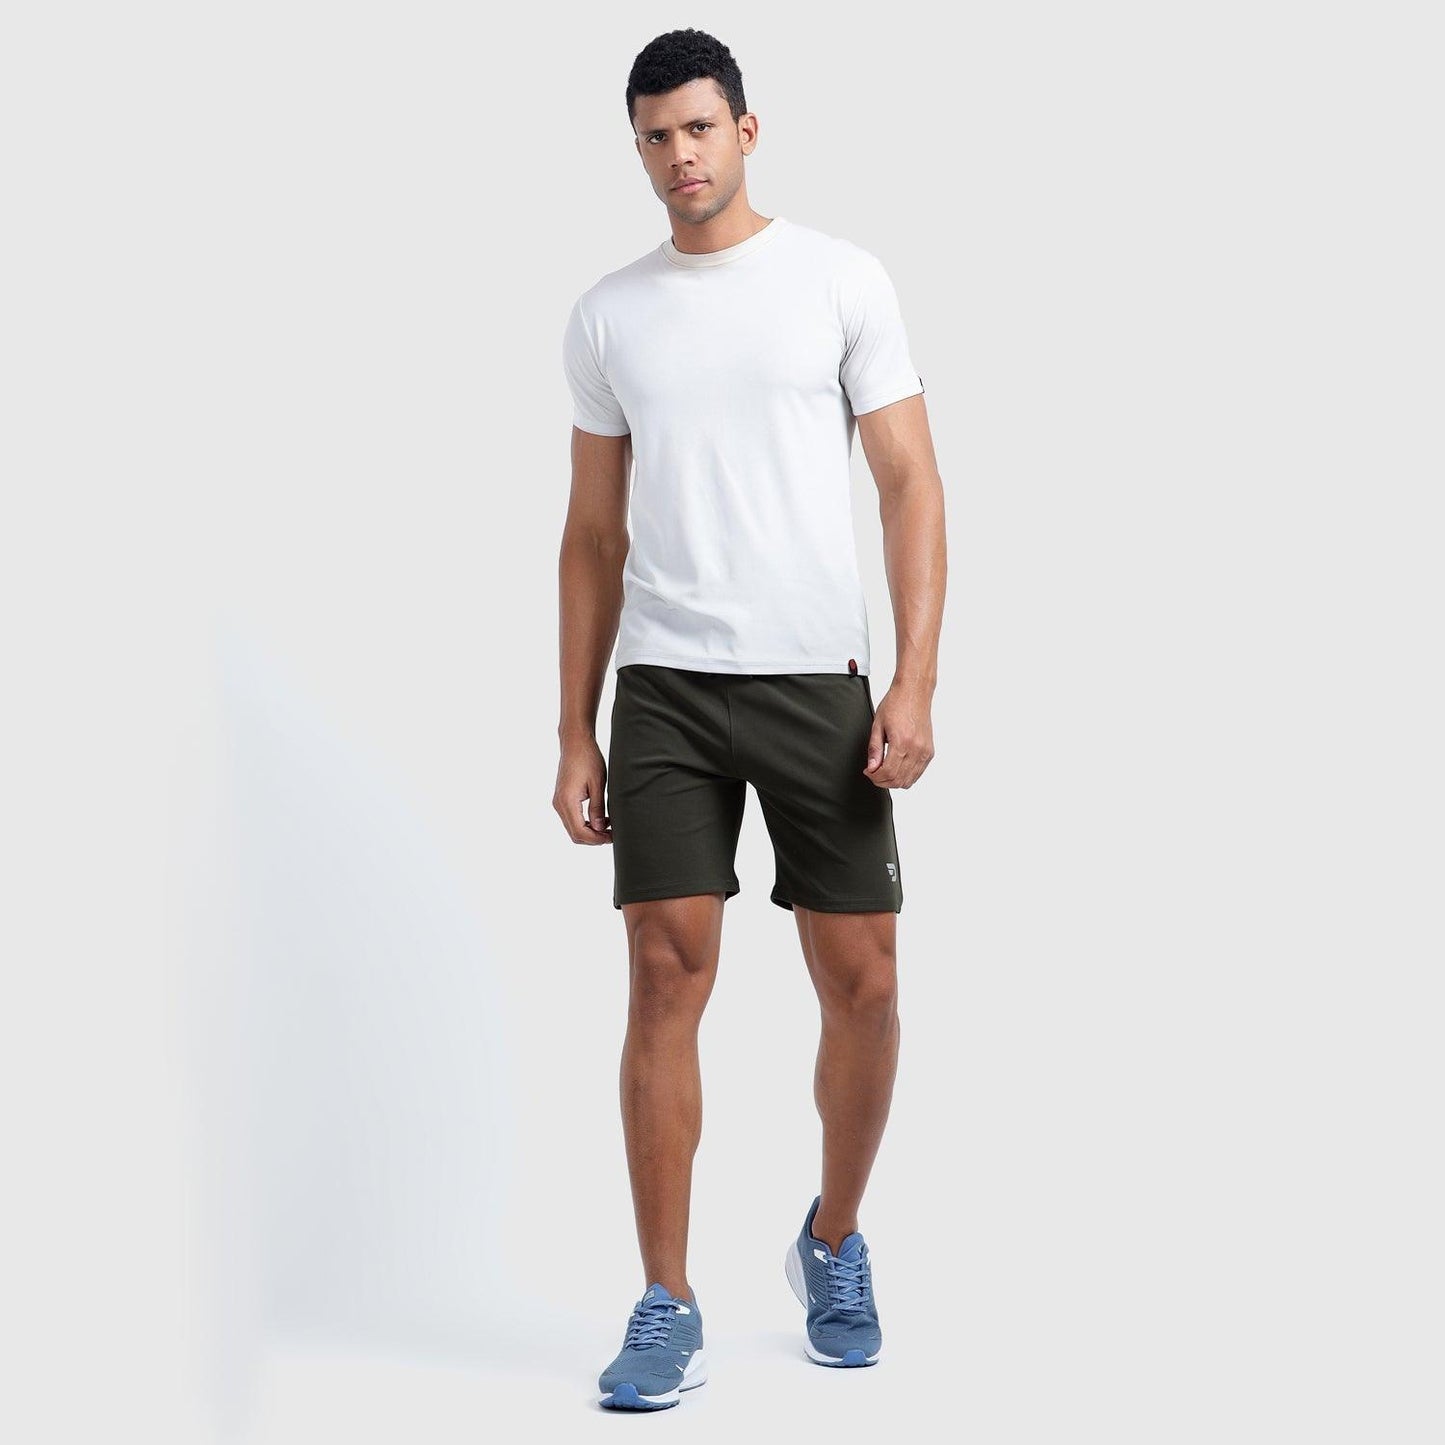 Denmonk's fashionable Retroglide Shorts core olive shorts for men will boost your level of gym fitness.